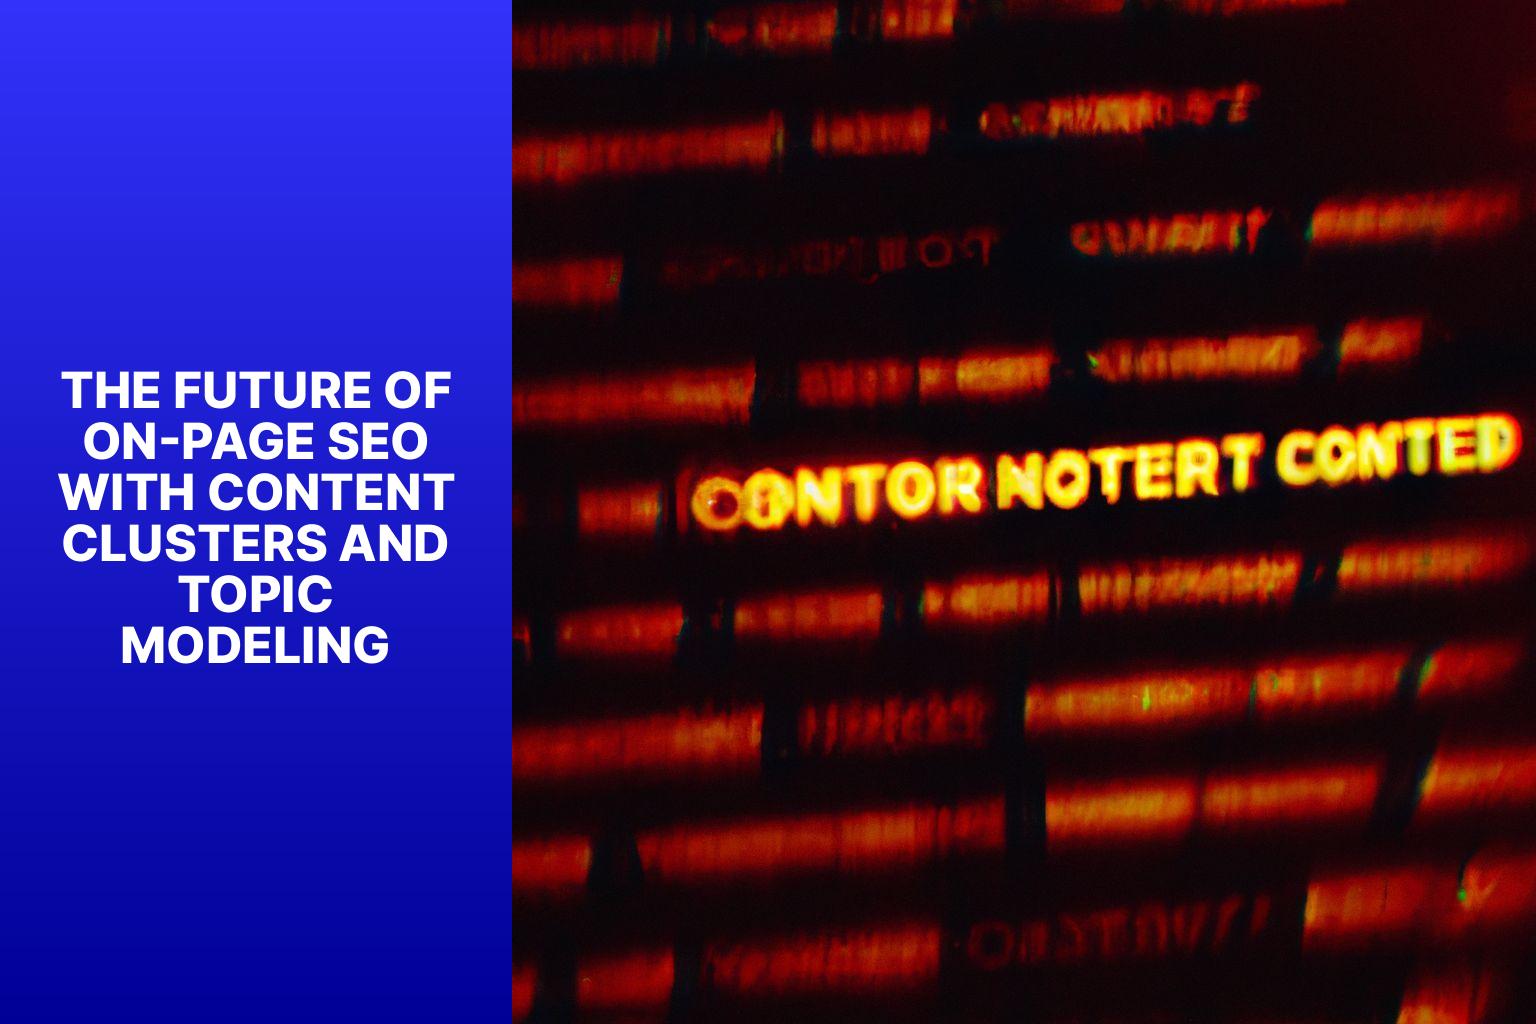 The Future of On-Page SEO with Content Clusters and Topic Modeling - Content Clusters and Topic Modeling: The Future of On-Page SEO? 